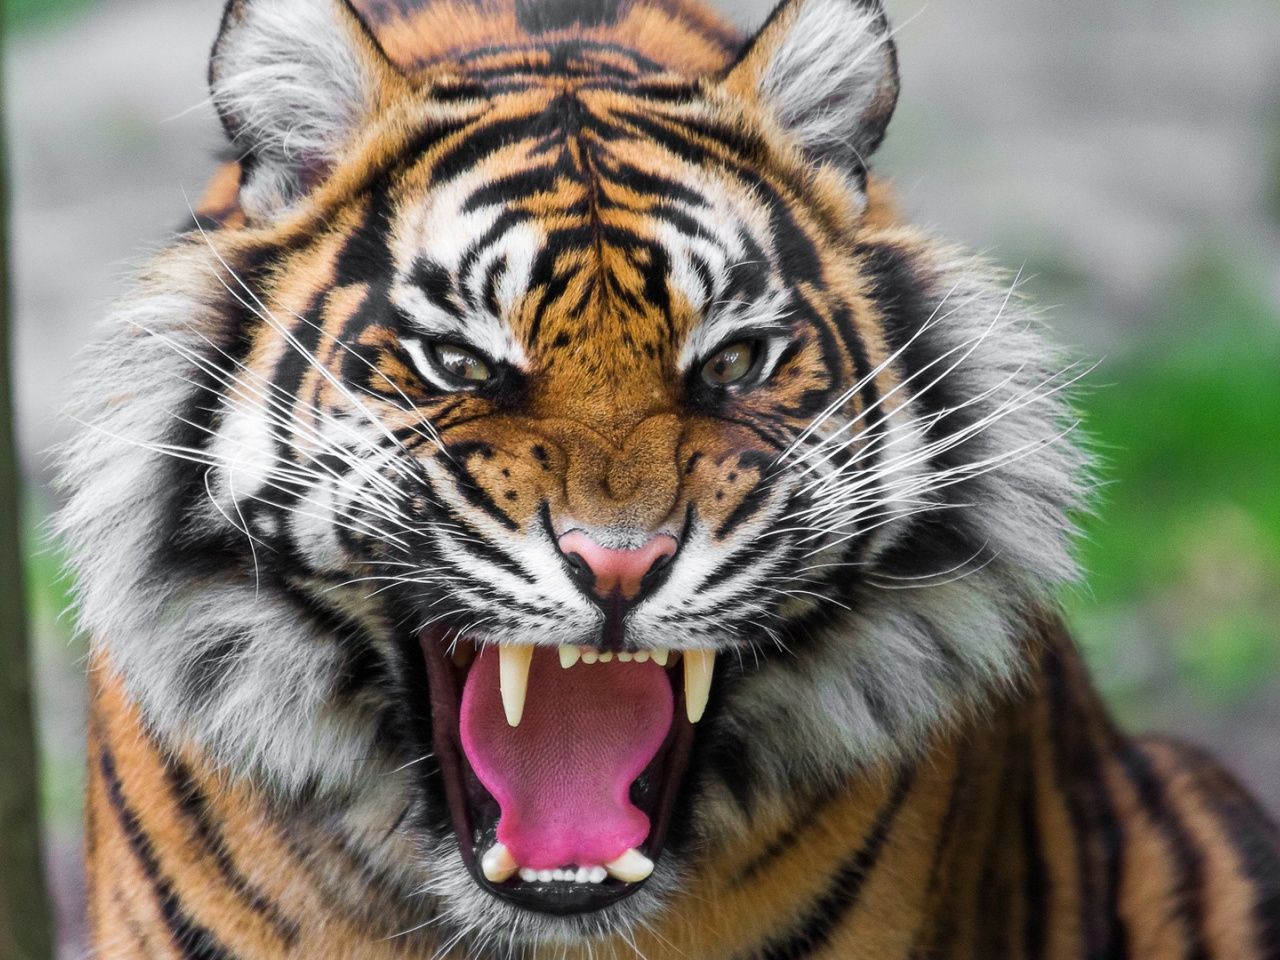 Man-eater tiger brought to central zoo